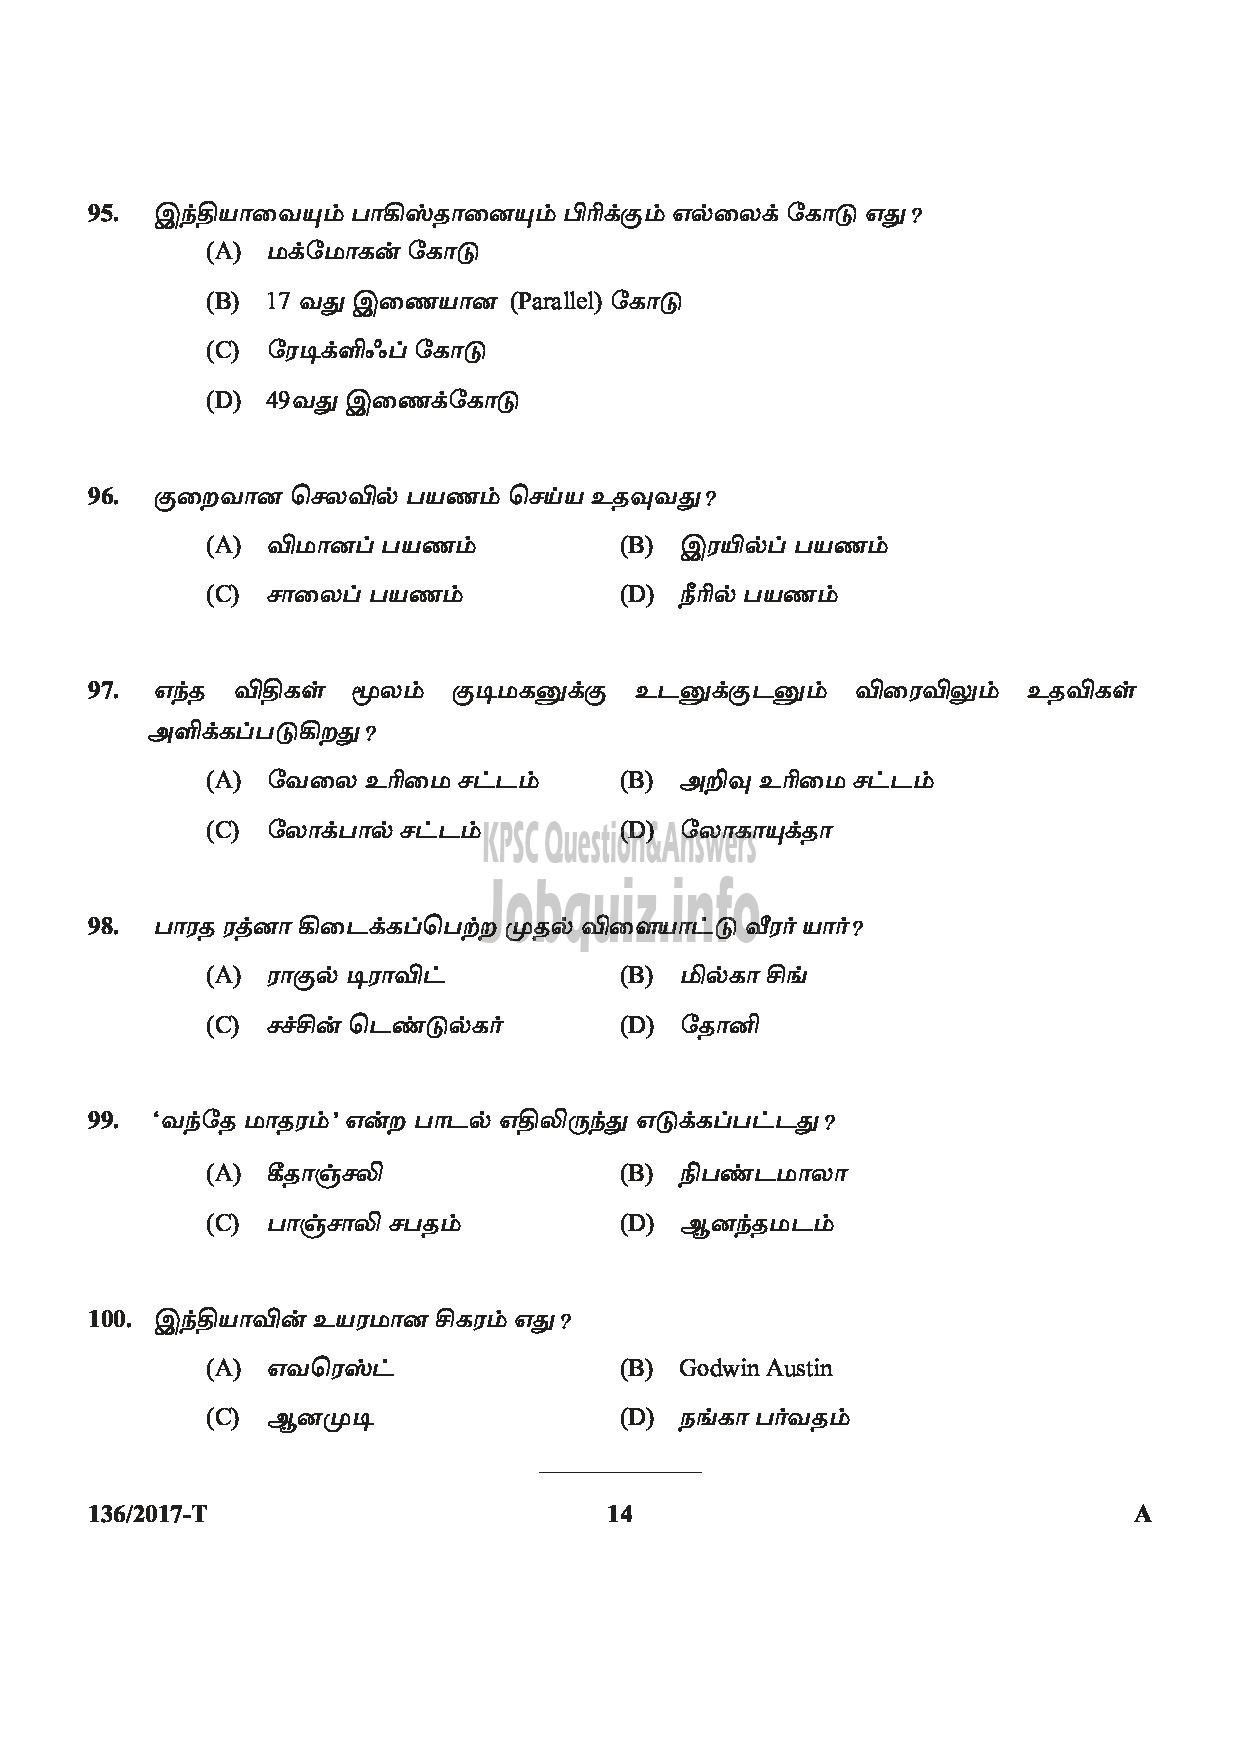 Kerala PSC Question Paper - METER READER/SPOT BILLER SPECIAL RECRUITMENT FROM AMONG ST ONLY MEDIUM OF QUESTION TAMIL-14